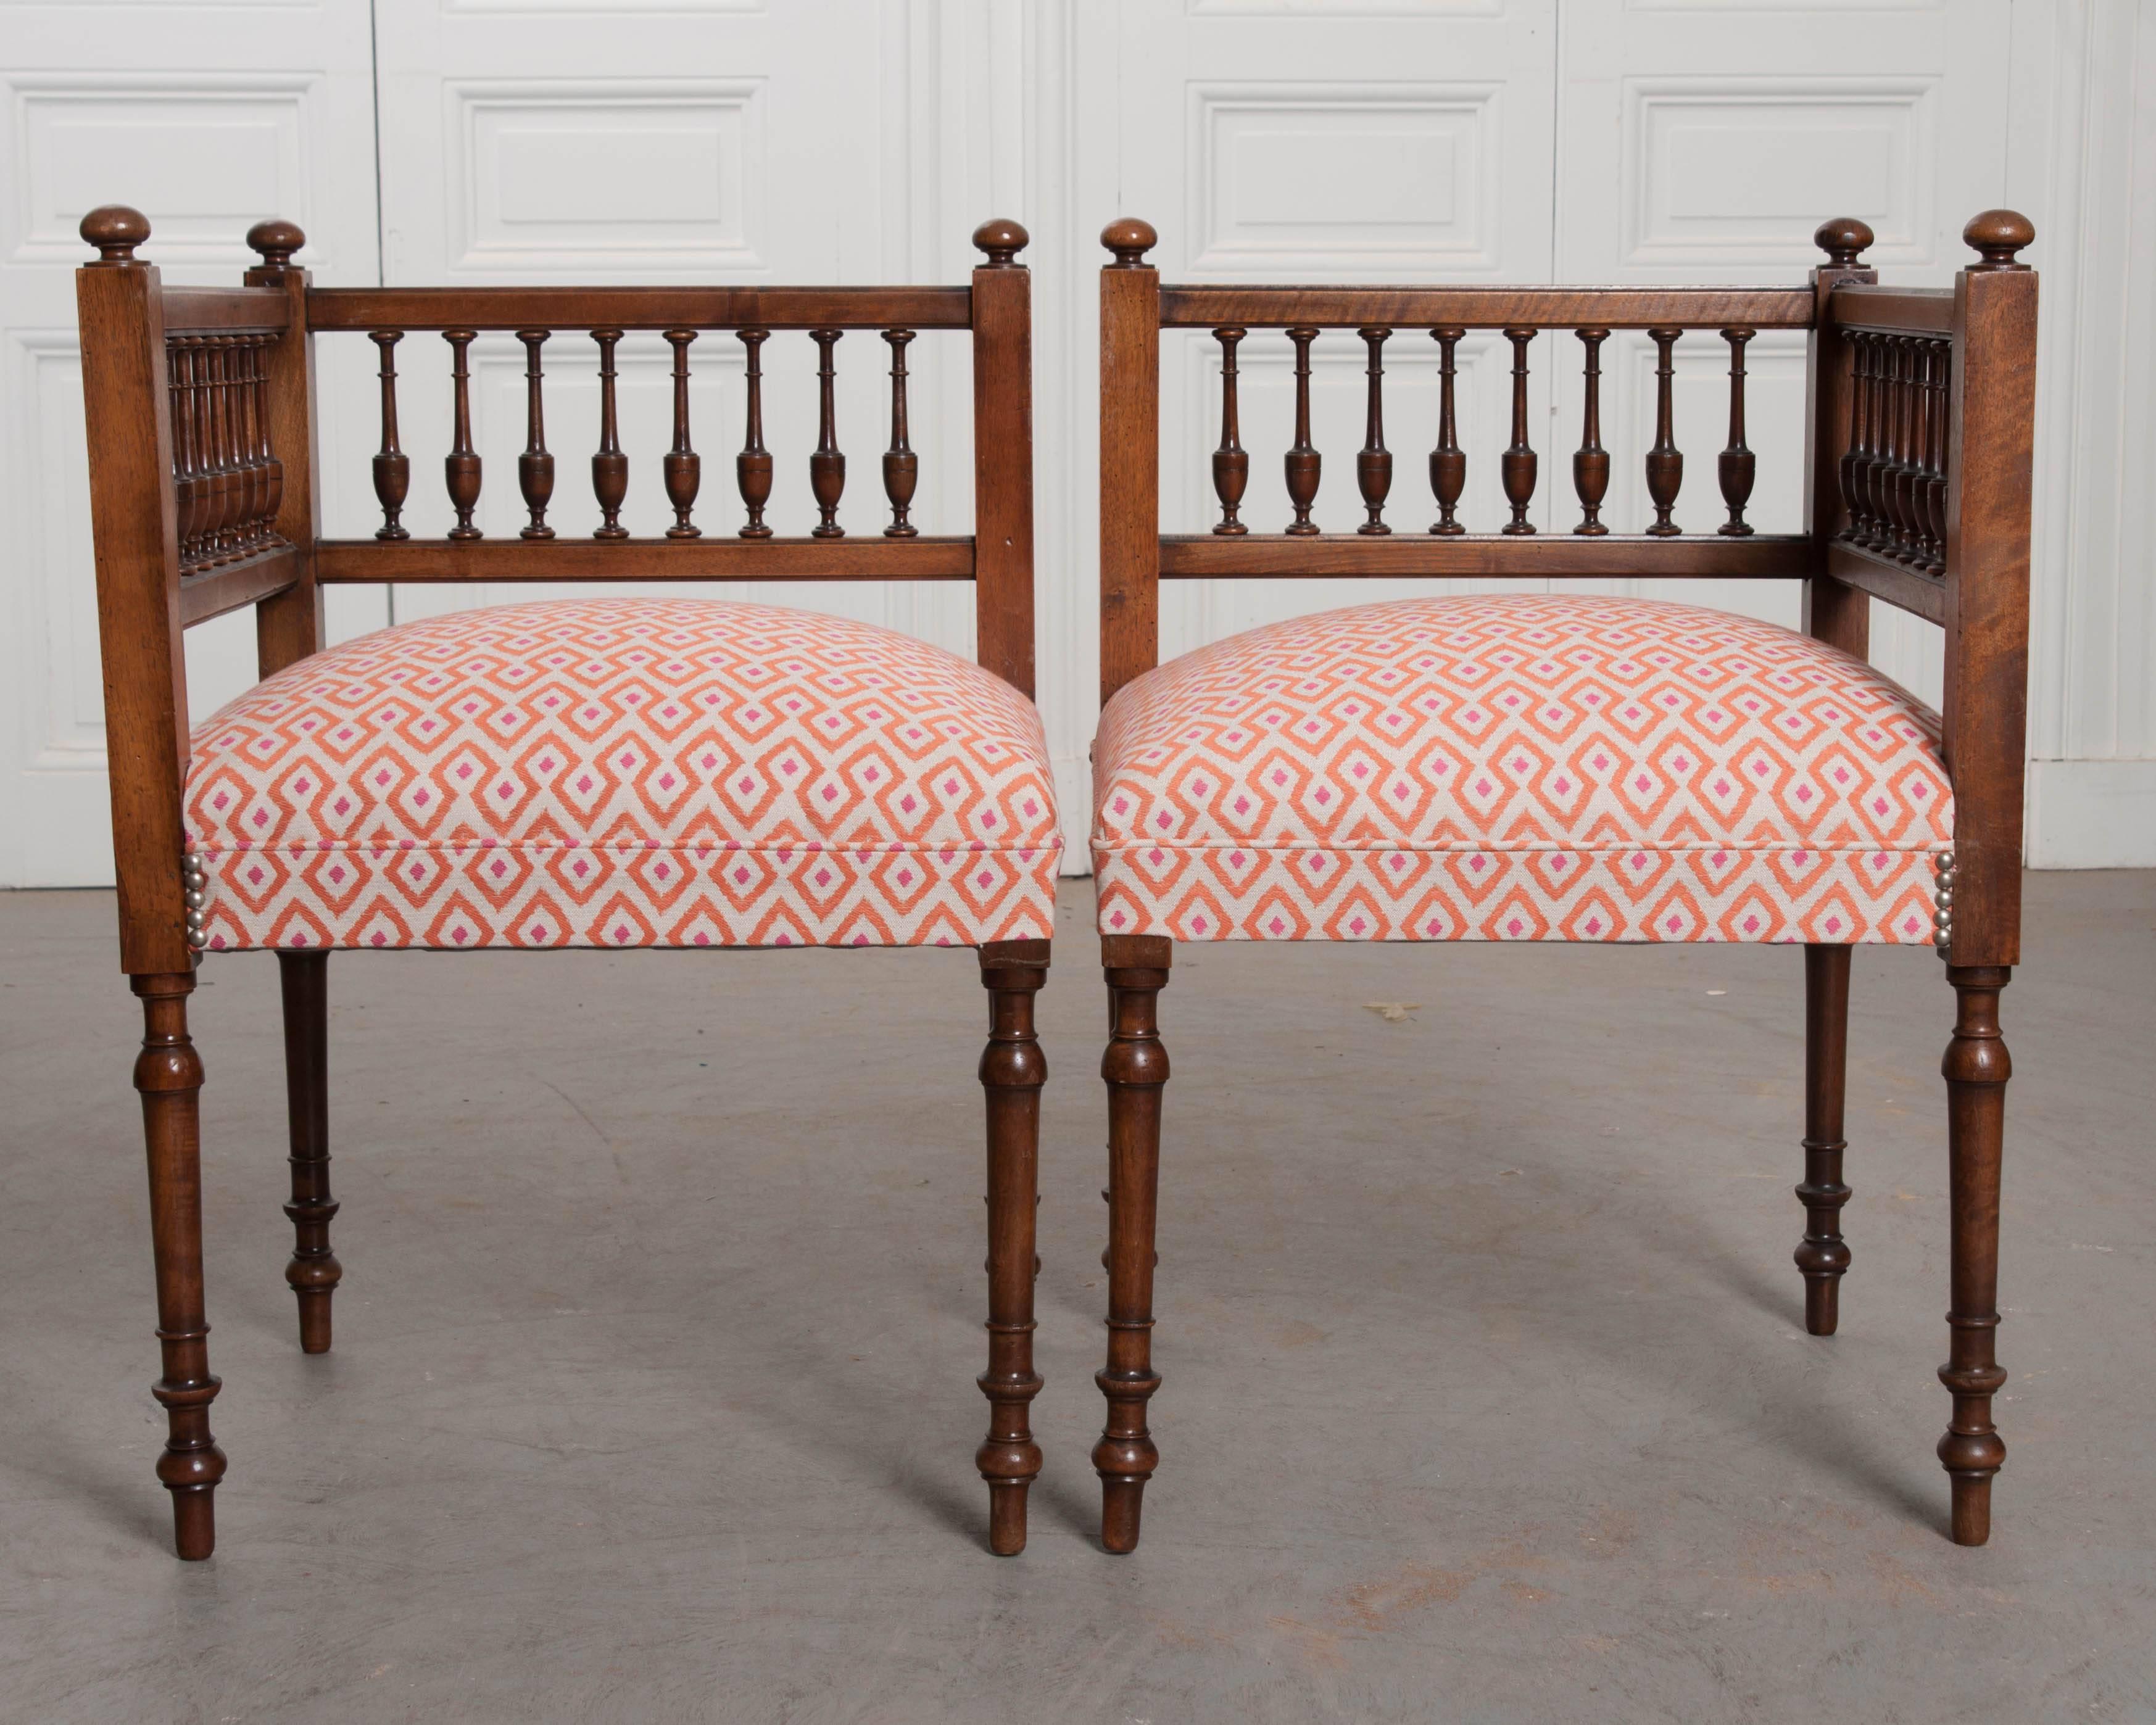 A darling pair of mahogany corner stools, made in early 20th century, France. The set has been recently upholstered in a geometric patterned fabric in a pink and orange colorway. The chairs have low, turned balustrade backs that have joinery topped